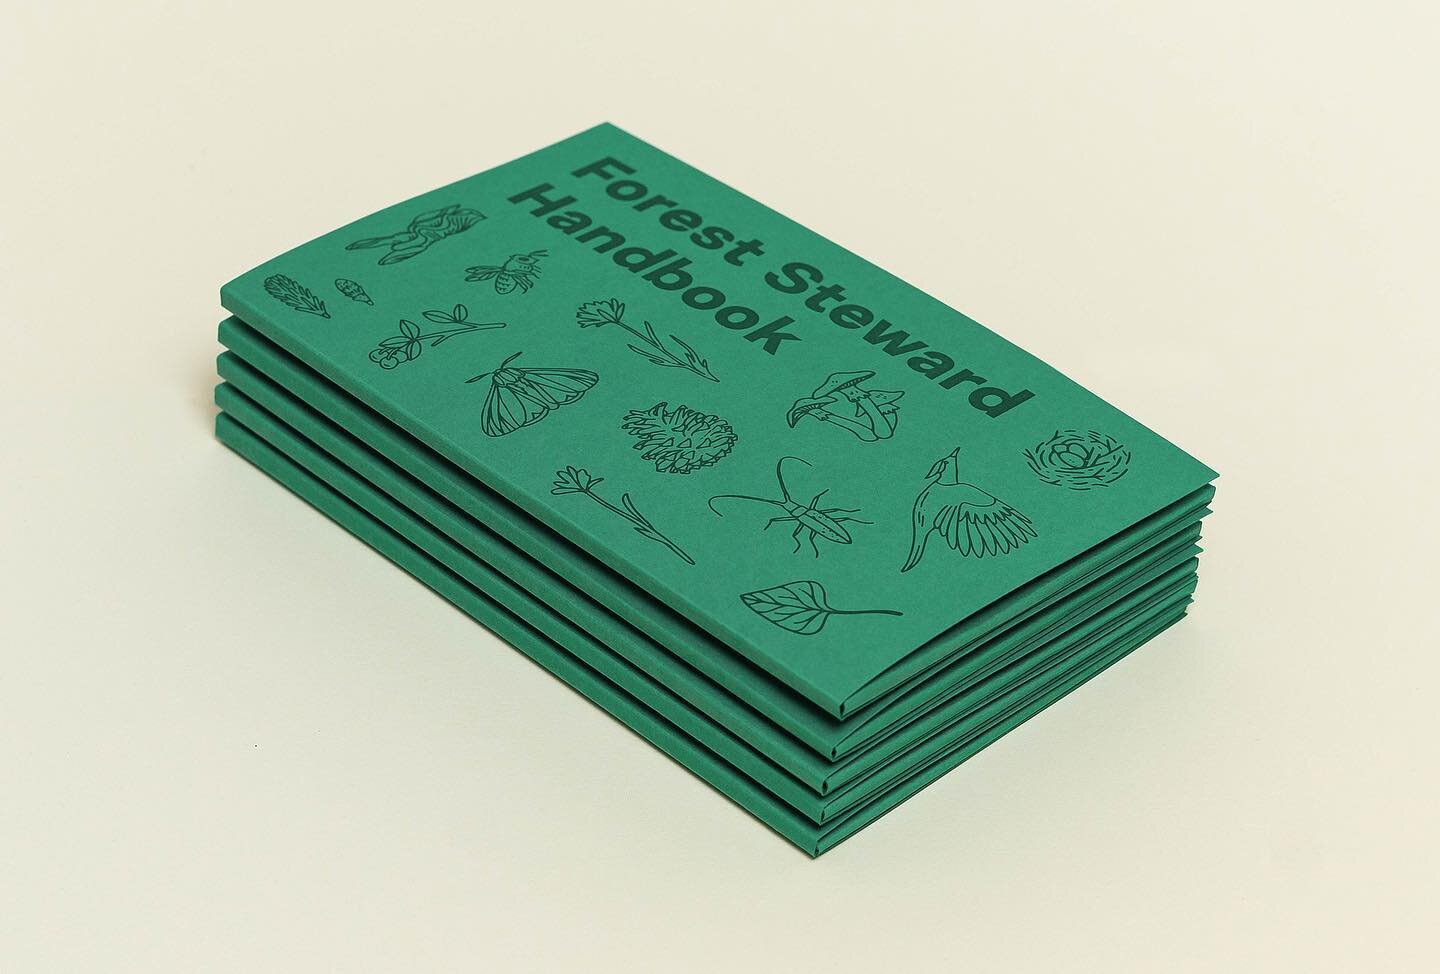 Helping people become better stewards with easy to understand resources about how forest ecosystems work - all packaged in a little letterpressed folder. Thanks to @cpawssab, @albertaecotrust, and @feastletterpress for helping make this dream a reali